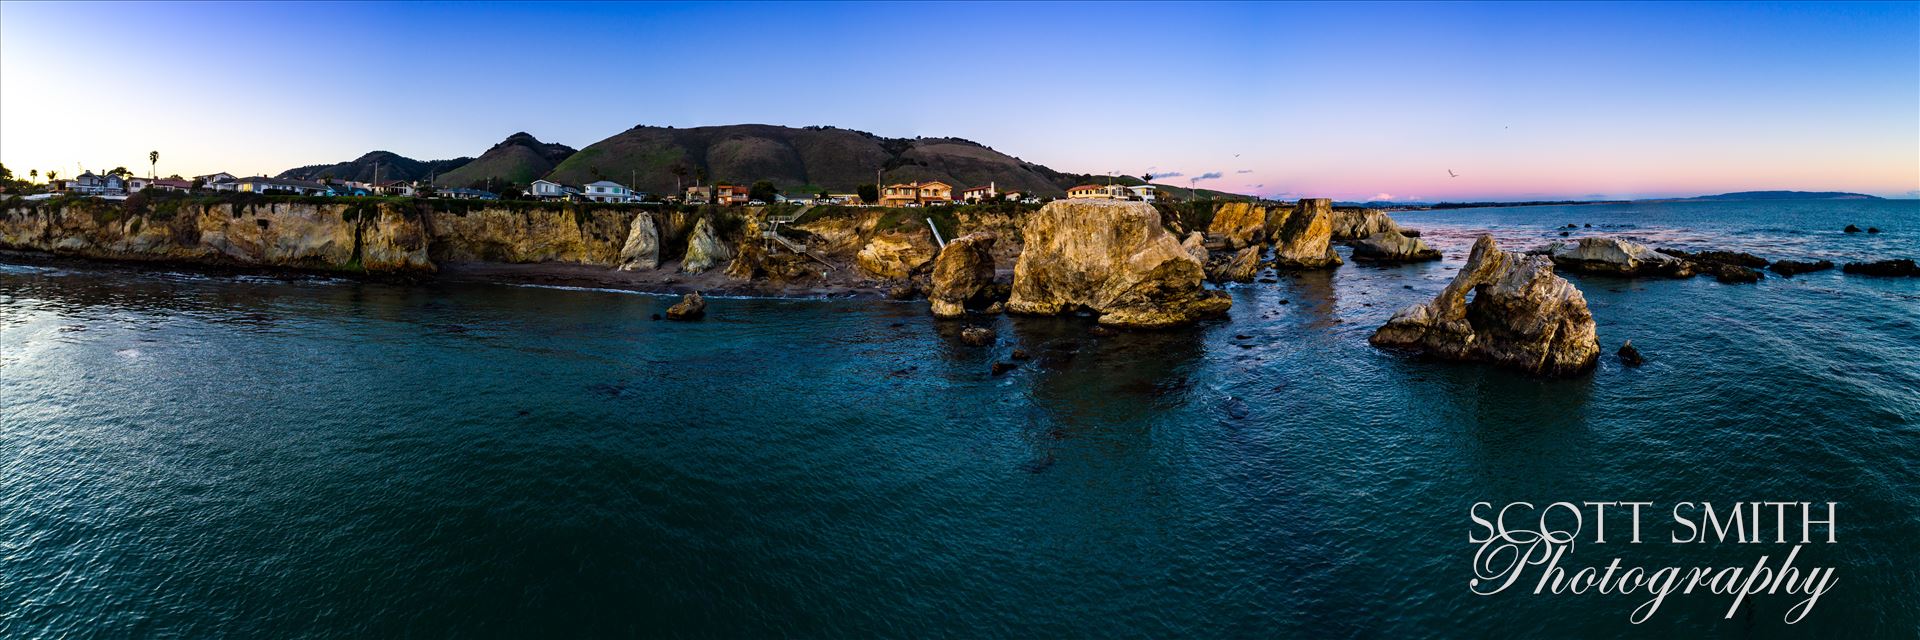 Aerial of Shell Beach No 3, California Near sunset, at Shell Beach, California.  Composite of 21 high res images from a Phantom 4 Pro.  This is a super high resolution image at over 16k by 4k pixels. by Scott Smith Photos